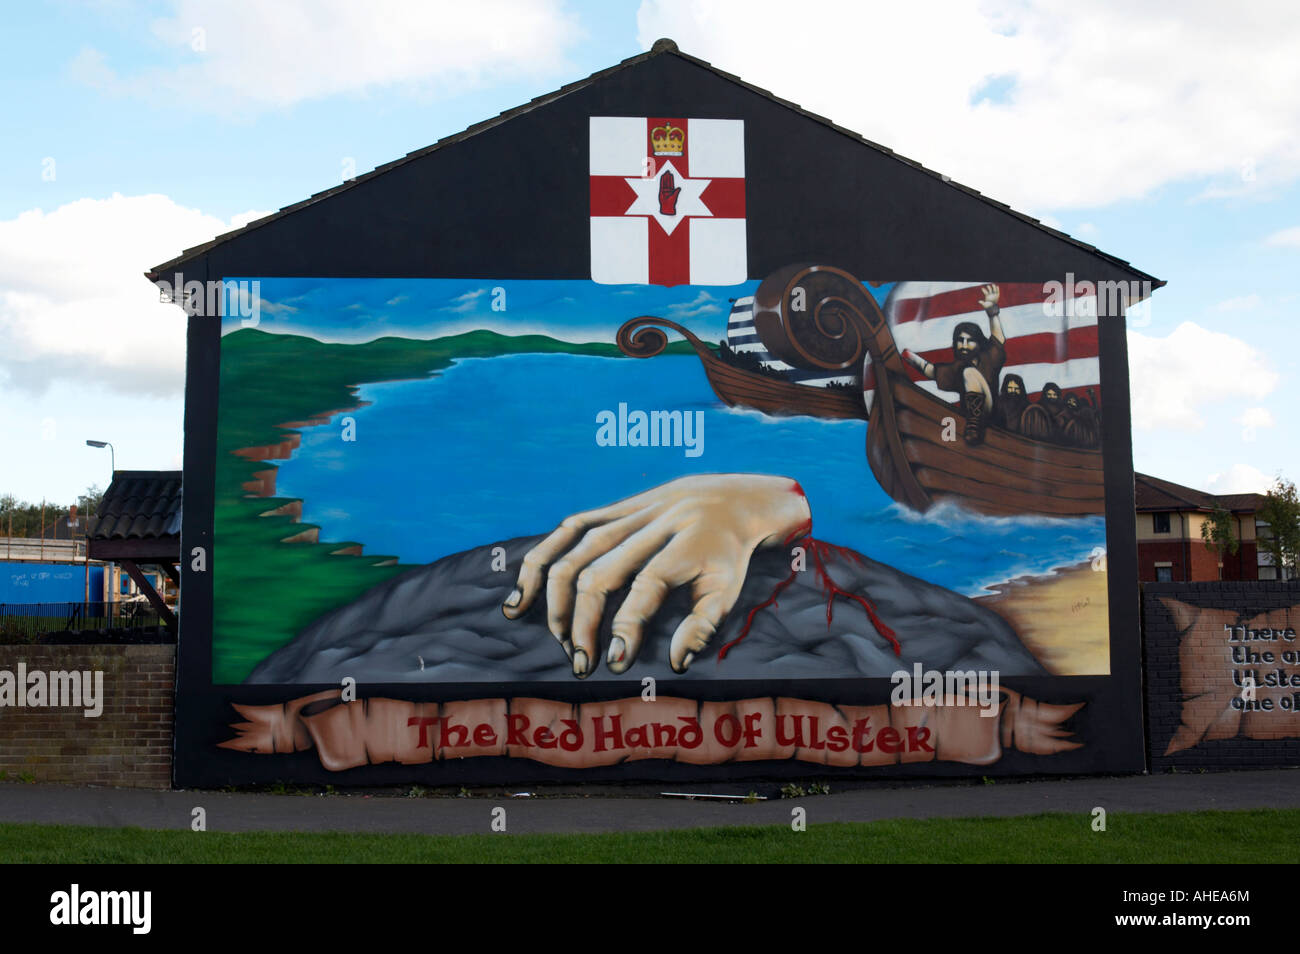 loyalist red hand of ulster murals in the Lower Shankill Road area of West Belfast Northern Ireland Stock Photo